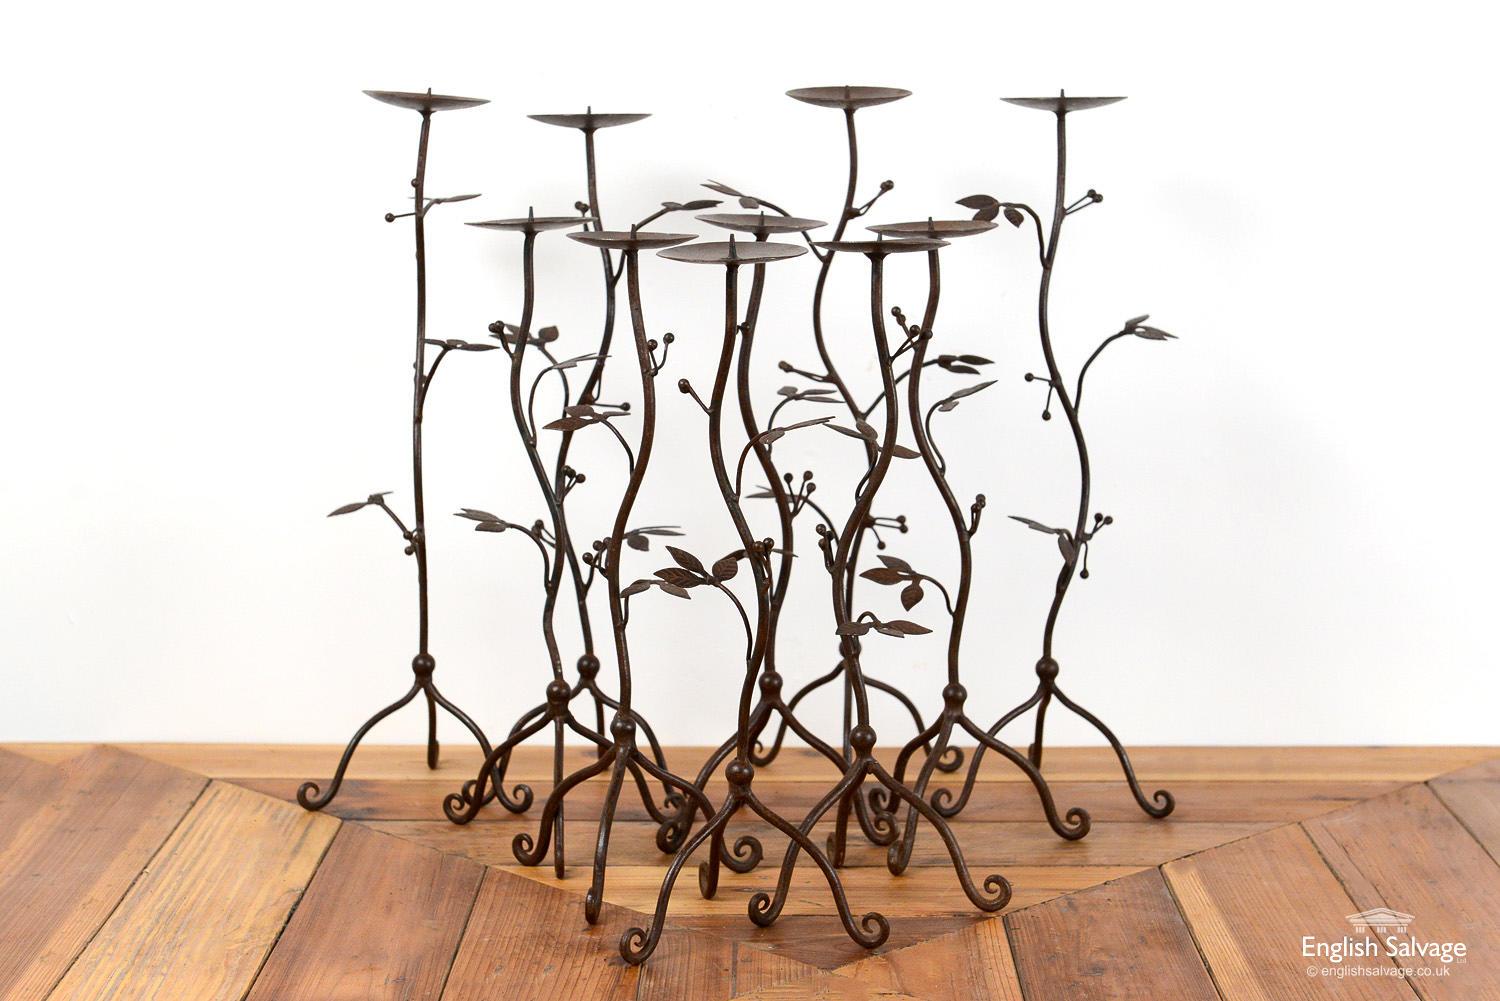 Handcrafted wrought iron candleholders / candlesticks with spikes to hold the candles. Crafted in a foliate and berry design, these look equally striking individually or in a group.